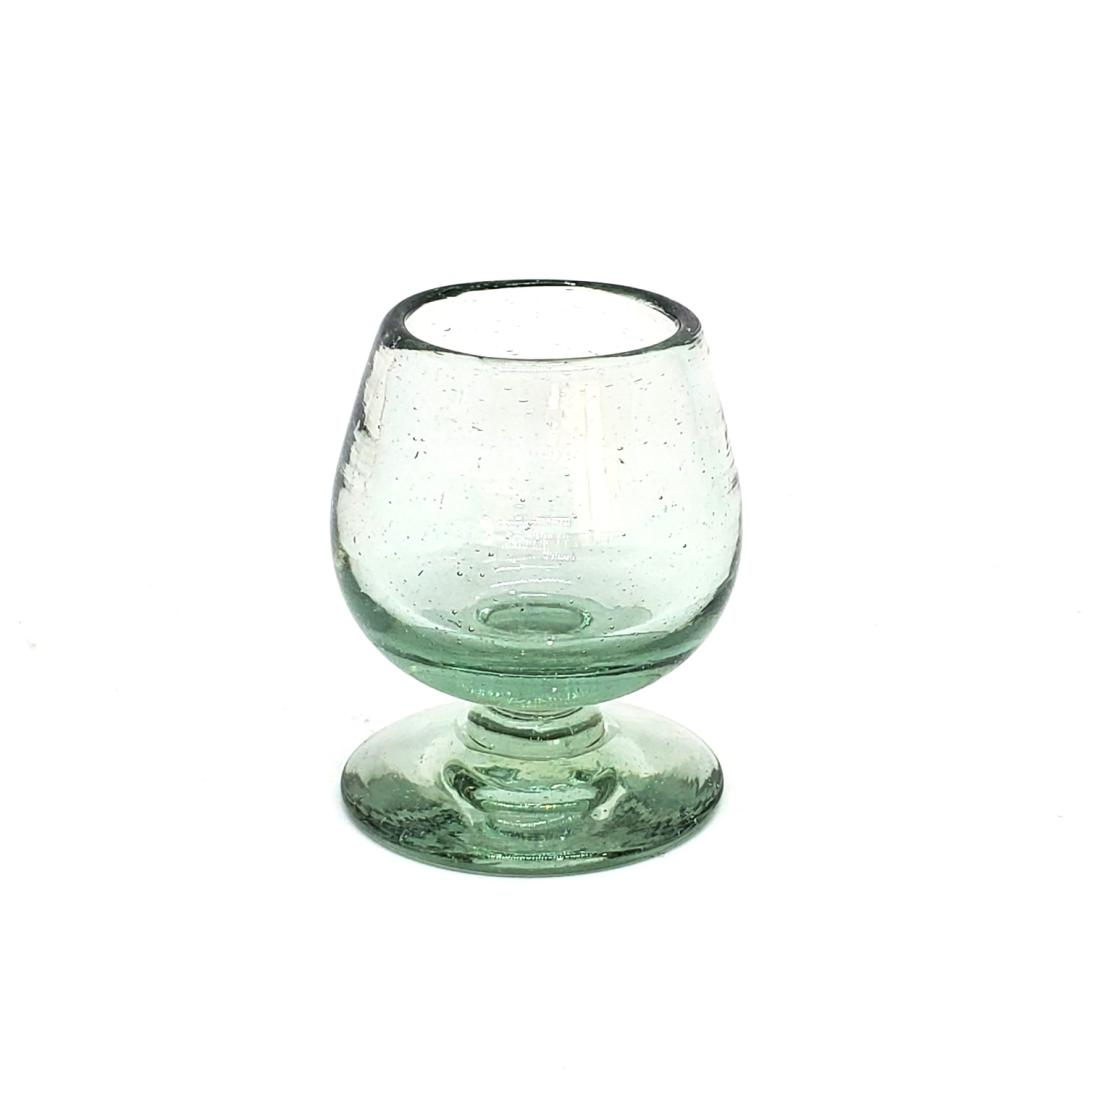 Clear Glassware / Clear 2.5 oz Tequila Sippers  (set of 6) / Sip your favourite tequila or mezcal with these iconic clear handcrafted sipping glasses. You may also serve lemon juice or other chasers.